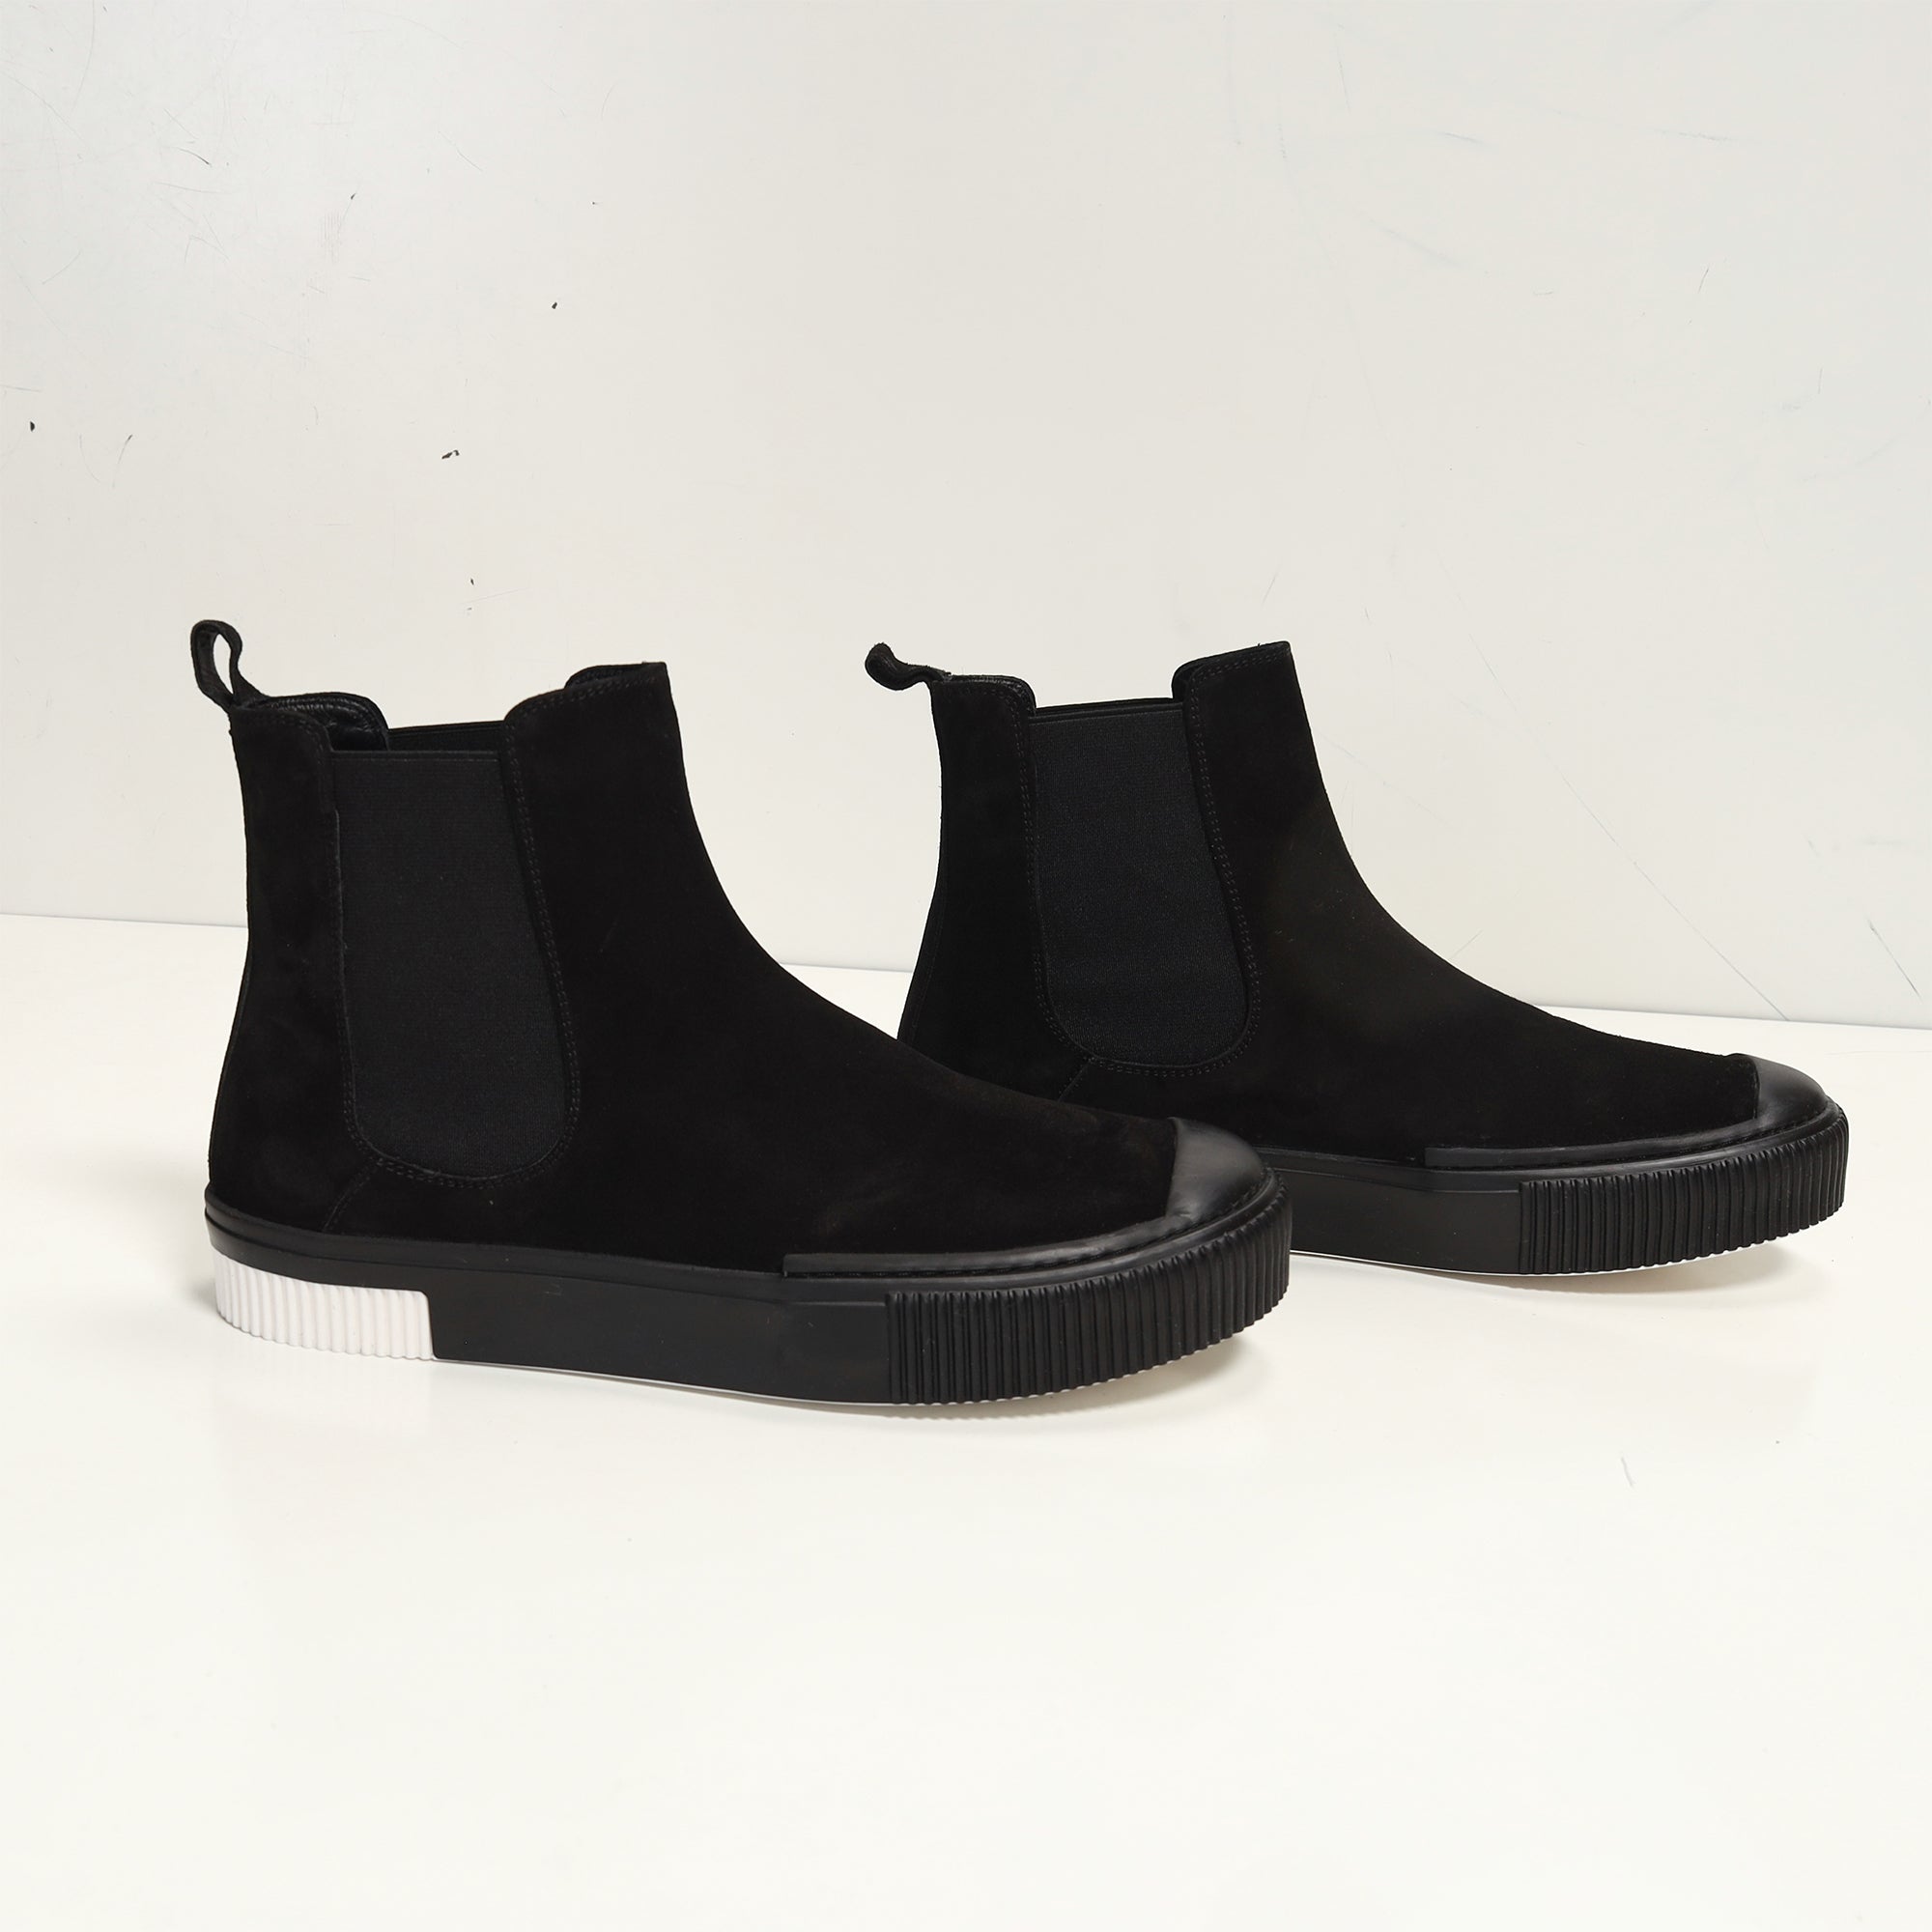 THE KING - Suede Leather and Rubber Sole Chelsea Boots - Black Black - Ron Tomson